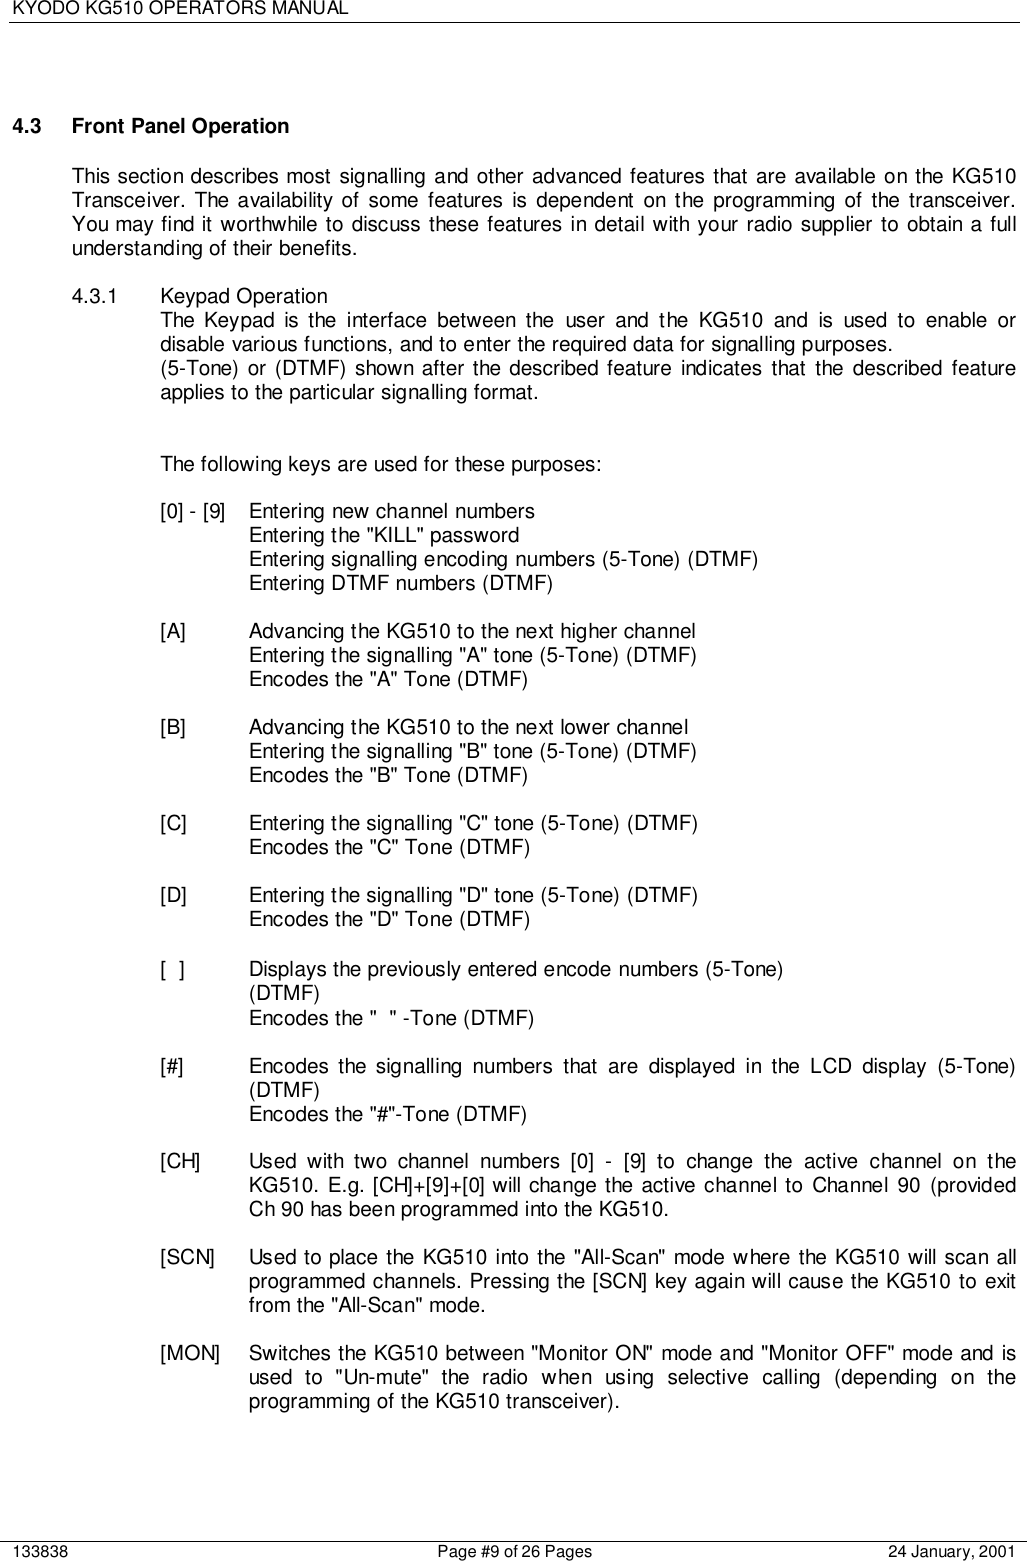 KYODO KG510 OPERATORS MANUAL133838 Page #9 of 26 Pages 24 January, 20014.3  Front Panel OperationThis section describes most signalling and other advanced features that are available on the KG510Transceiver. The availability of some features is dependent on the programming of the transceiver.You may find it worthwhile to discuss these features in detail with your radio supplier to obtain a fullunderstanding of their benefits.4.3.1 Keypad OperationThe Keypad is the interface between the user and the KG510 and is used to enable ordisable various functions, and to enter the required data for signalling purposes.(5-Tone) or (DTMF) shown after the described feature indicates that the described featureapplies to the particular signalling format.The following keys are used for these purposes:[0] - [9] Entering new channel numbersEntering the &quot;KILL&quot; passwordEntering signalling encoding numbers (5-Tone) (DTMF)Entering DTMF numbers (DTMF)[A] Advancing the KG510 to the next higher channelEntering the signalling &quot;A&quot; tone (5-Tone) (DTMF)Encodes the &quot;A&quot; Tone (DTMF)[B] Advancing the KG510 to the next lower channelEntering the signalling &quot;B&quot; tone (5-Tone) (DTMF)Encodes the &quot;B&quot; Tone (DTMF)[C] Entering the signalling &quot;C&quot; tone (5-Tone) (DTMF)Encodes the &quot;C&quot; Tone (DTMF)[D] Entering the signalling &quot;D&quot; tone (5-Tone) (DTMF)Encodes the &quot;D&quot; Tone (DTMF)[ ] Displays the previously entered encode numbers (5-Tone)(DTMF)Encodes the &quot; &quot; -Tone (DTMF)[#] Encodes the signalling numbers that are displayed in the LCD display (5-Tone)(DTMF)Encodes the &quot;#&quot;-Tone (DTMF)[CH] Used with two channel numbers [0] - [9] to change the active channel on theKG510. E.g. [CH]+[9]+[0] will change the active channel to Channel 90 (providedCh 90 has been programmed into the KG510.[SCN] Used to place the KG510 into the &quot;All-Scan&quot; mode where the KG510 will scan allprogrammed channels. Pressing the [SCN] key again will cause the KG510 to exitfrom the &quot;All-Scan&quot; mode.[MON] Switches the KG510 between &quot;Monitor ON&quot; mode and &quot;Monitor OFF&quot; mode and isused to &quot;Un-mute&quot; the radio when using selective calling (depending on theprogramming of the KG510 transceiver).